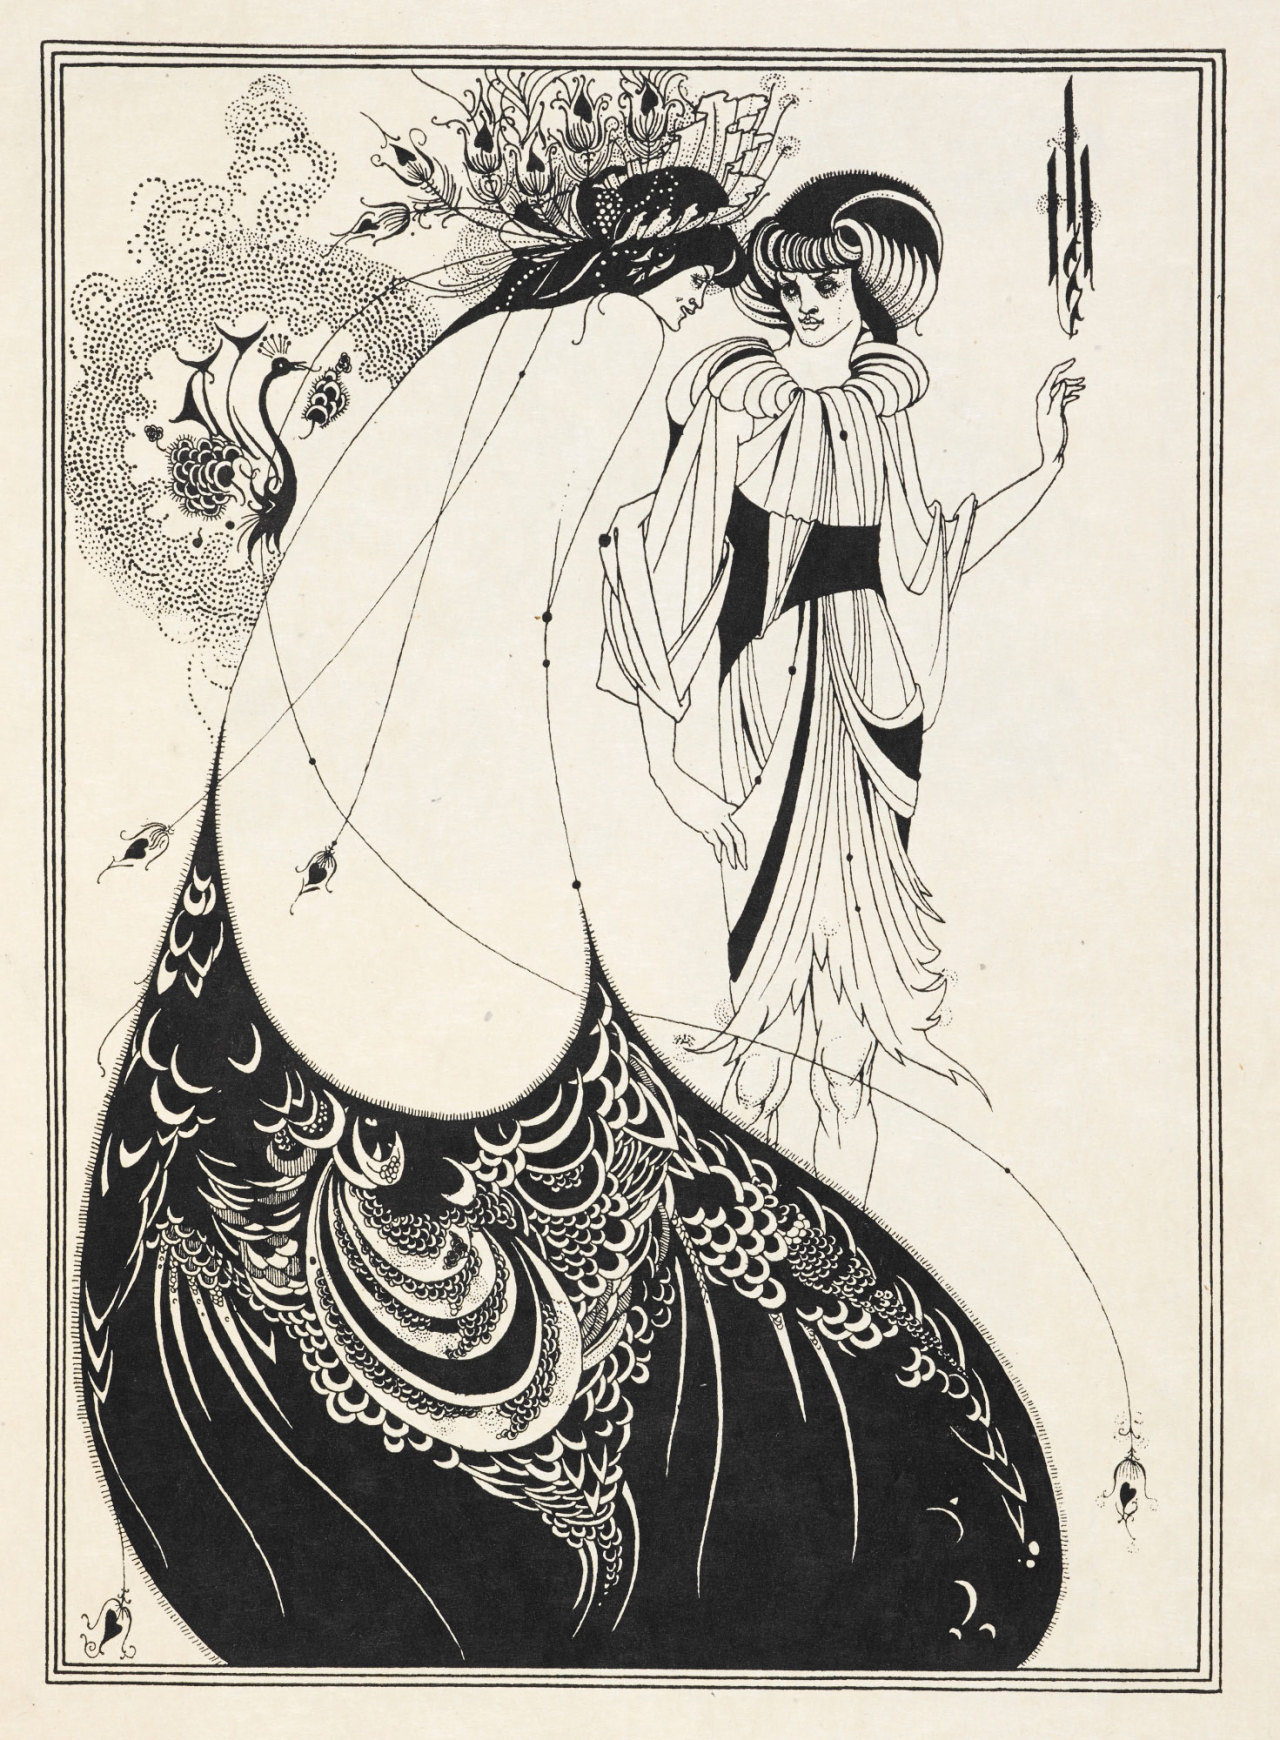 musikgiggles:

Oscar Wilde’s Play Salome Illustrated by Aubrey Beardsley in a Striking Modern Aesthetic (1894)
